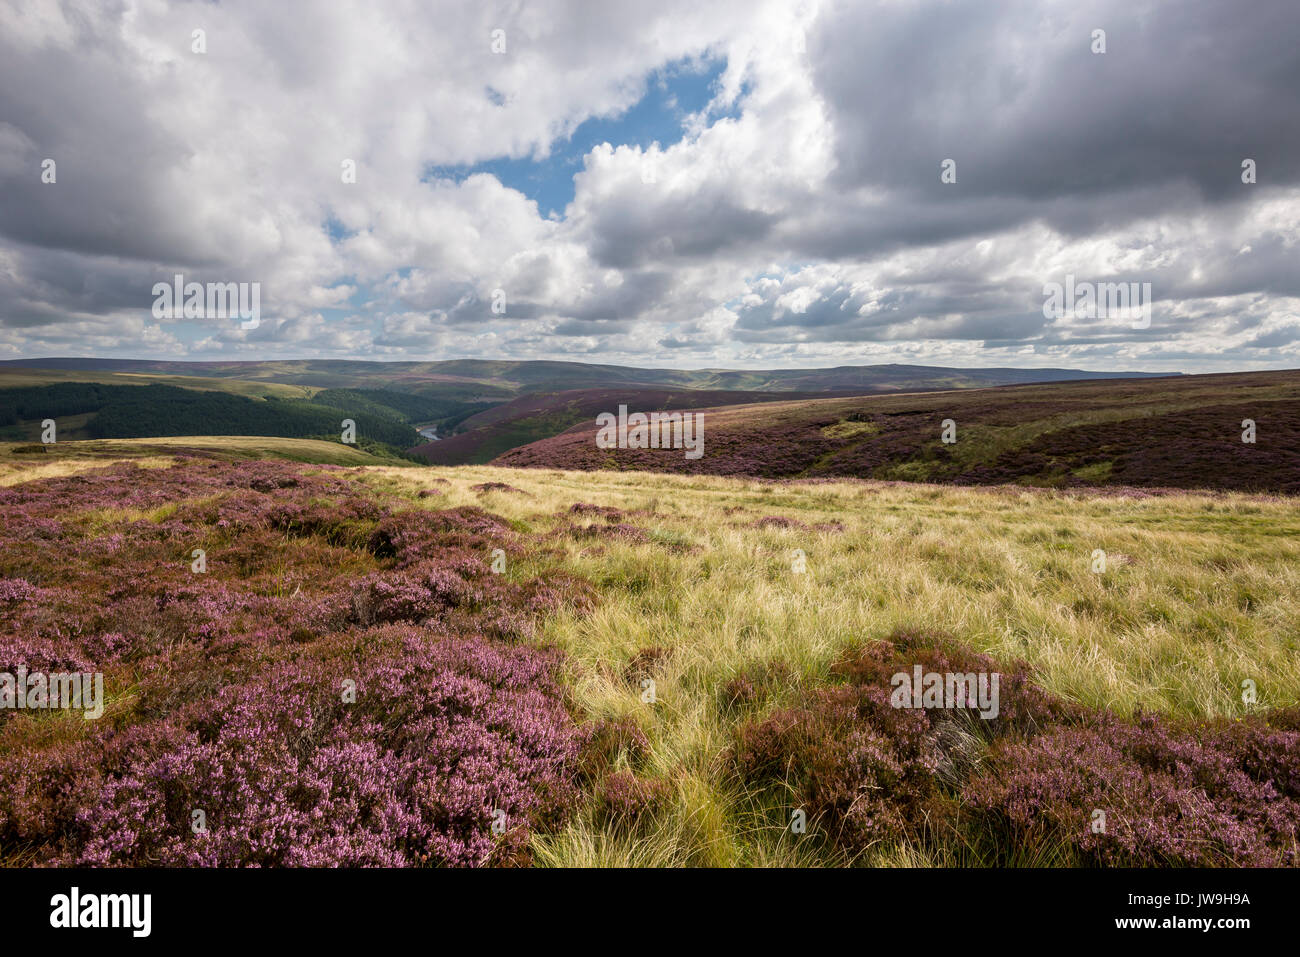 Beautiful landscape of purple heather in flower on moors of the High Peak, Derbyshire, England. Stock Photo